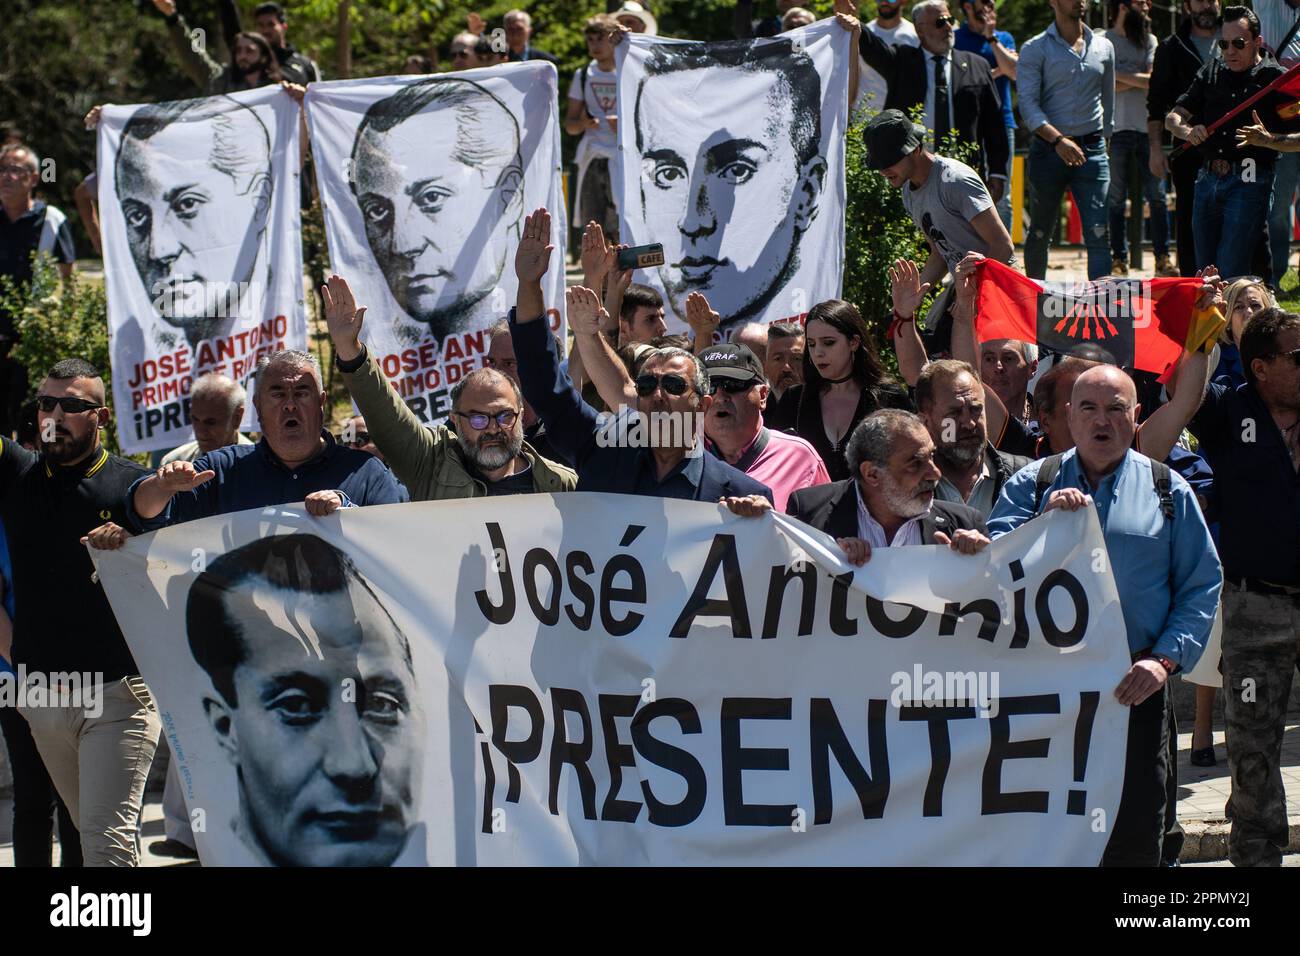 Madrid, Spain. 24th Apr, 2023. Members and supporters of La Falange party carrying banners raising hands making a fascist salute during a protest outside the San Isidro Cemetery the day of the exhumation of the remains of the founder of Falange, Jose Antonio Primo de Rivera. The fascist politician's remains were exhumed from the Valle de los Caidos (known now as Valle de Cuelgamuros) and transferred to the San Isidro cemetery. Credit: Marcos del Mazo/Alamy Live News Stock Photo